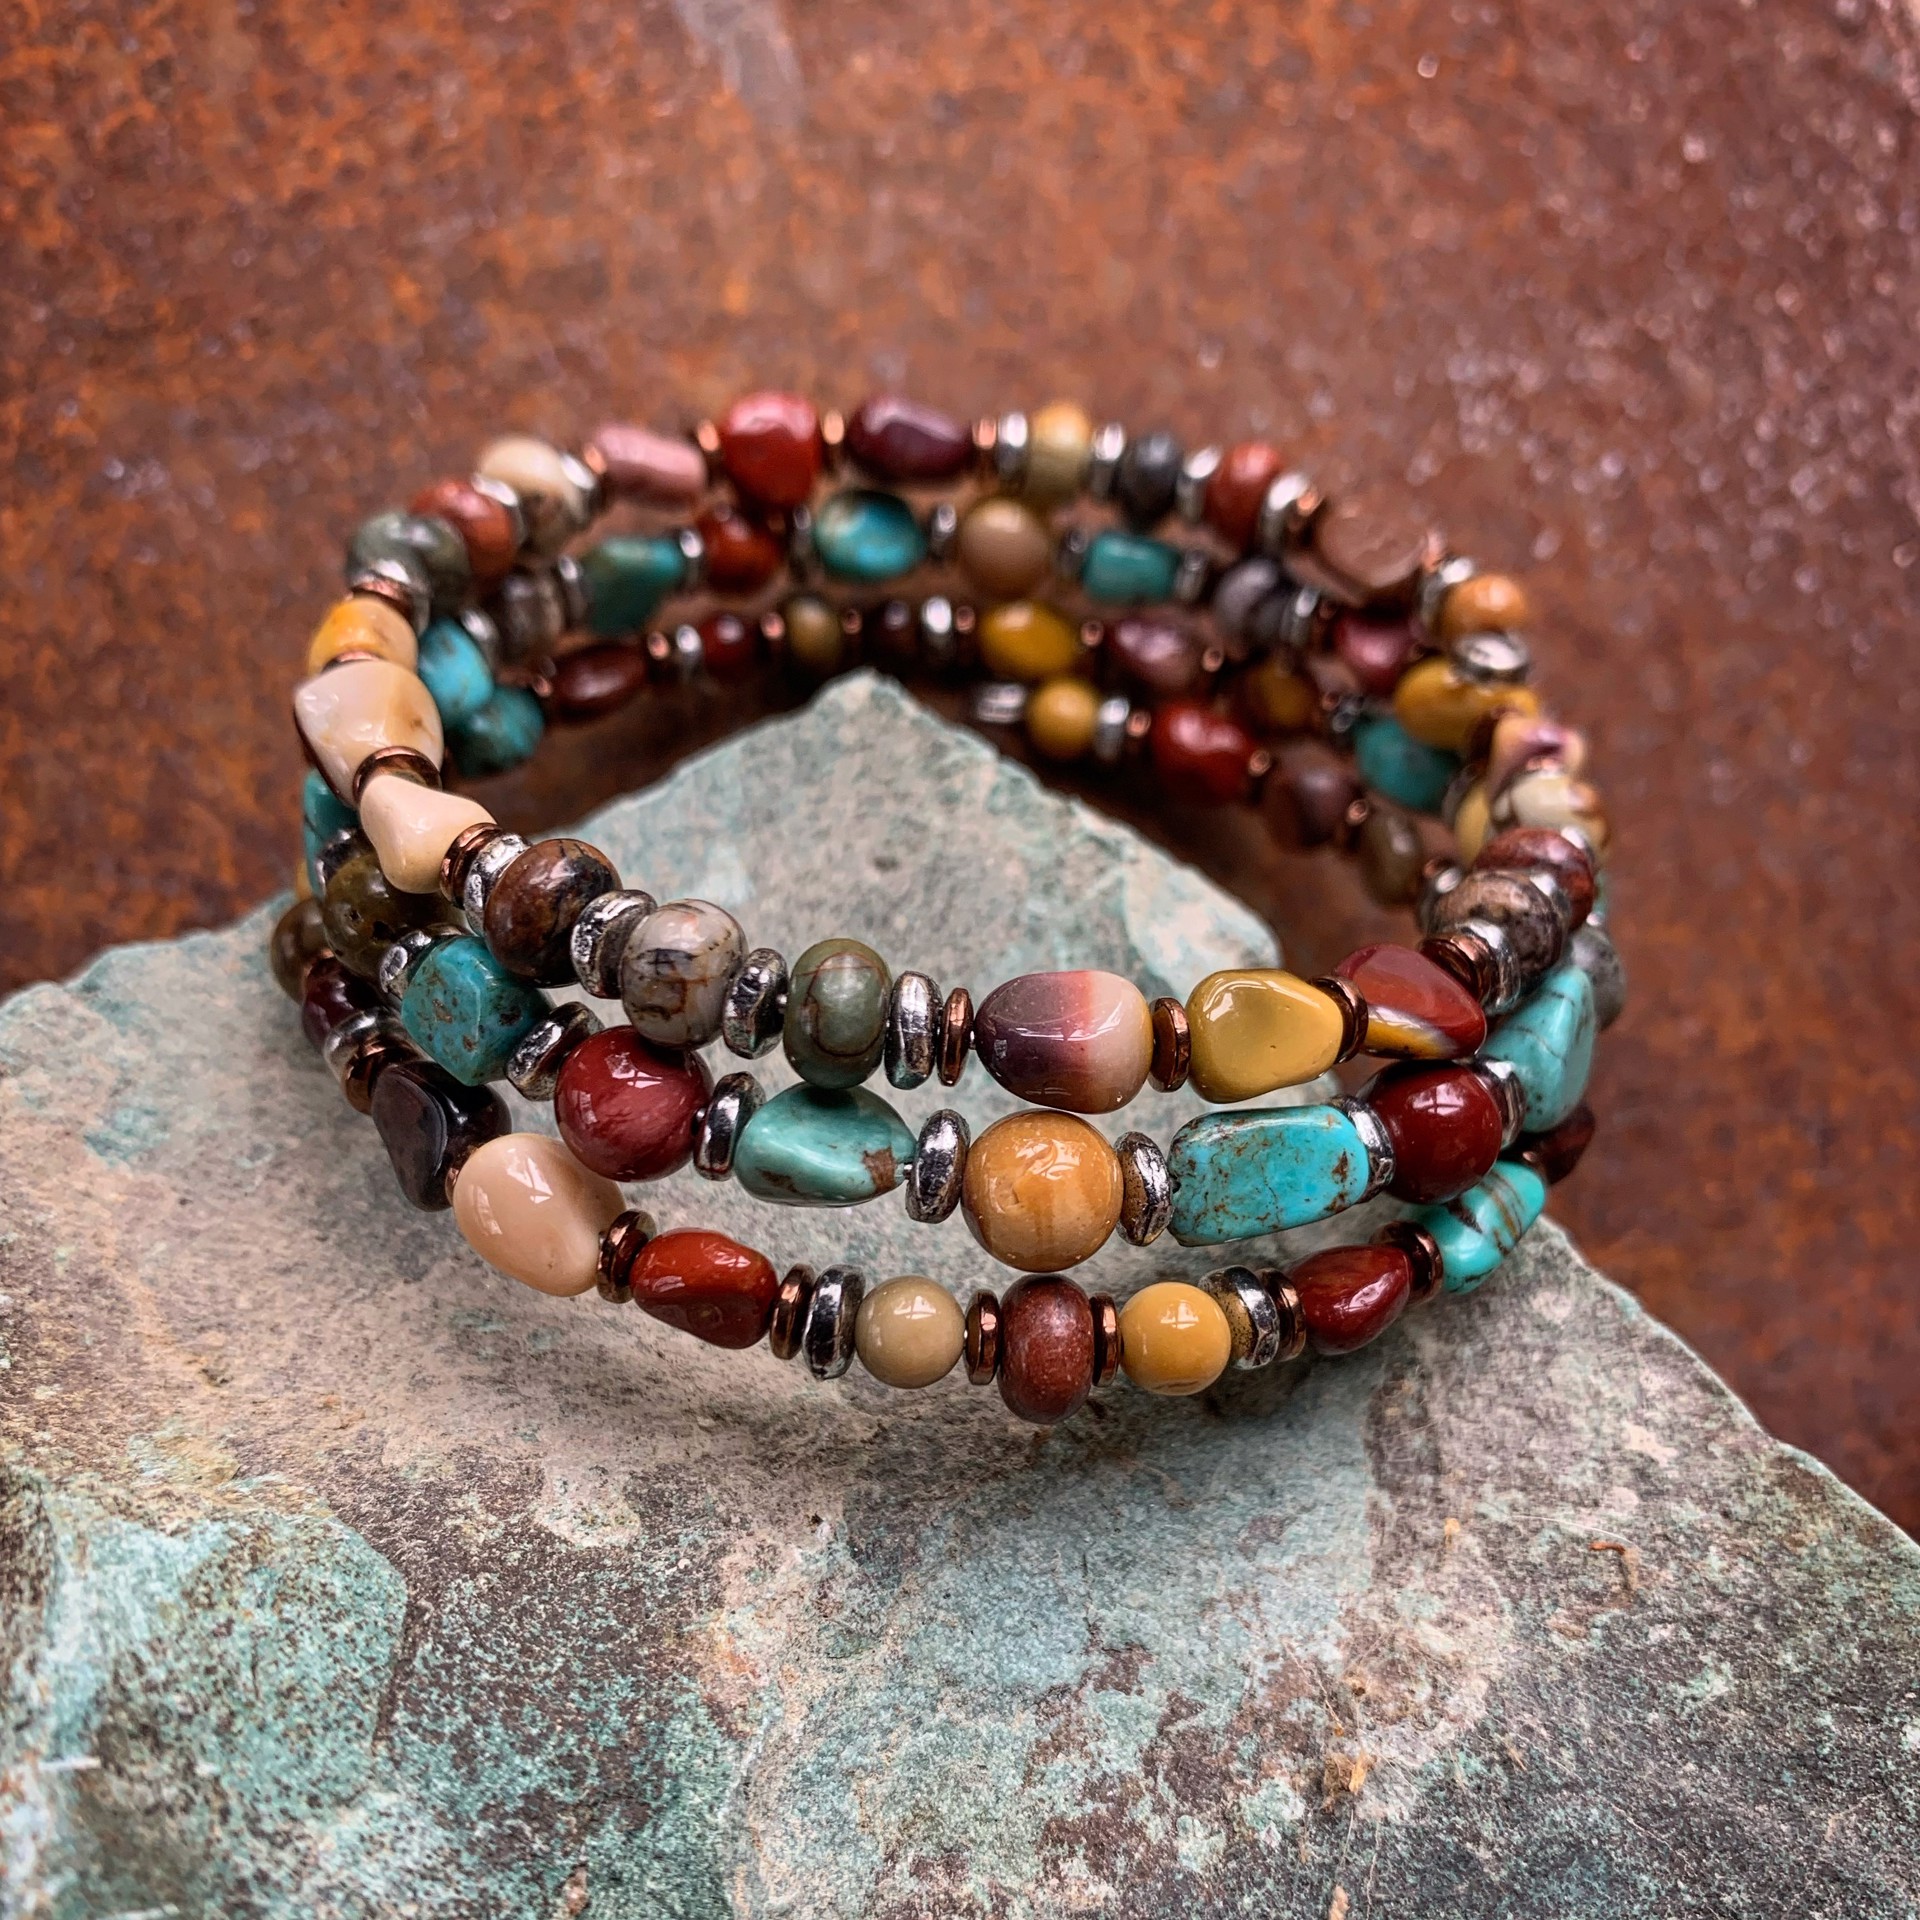 K752 Mookaite and Turquoise Bracelet by Kelly Ormsby